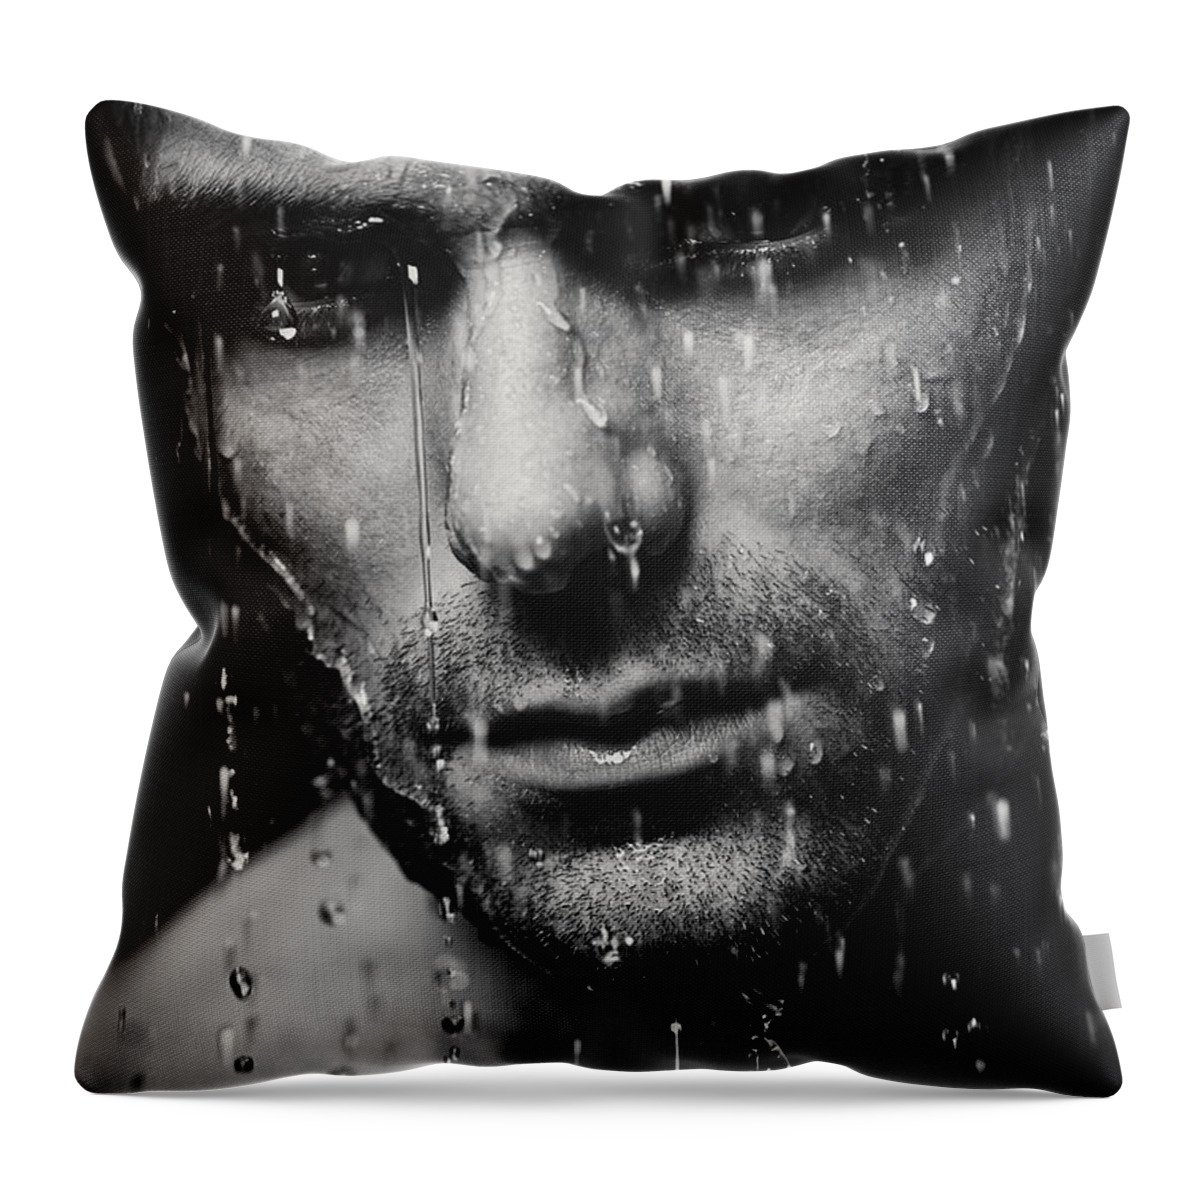 Man Throw Pillow featuring the photograph Dramatic portrait of man wet face Black and white by Maxim Images Exquisite Prints